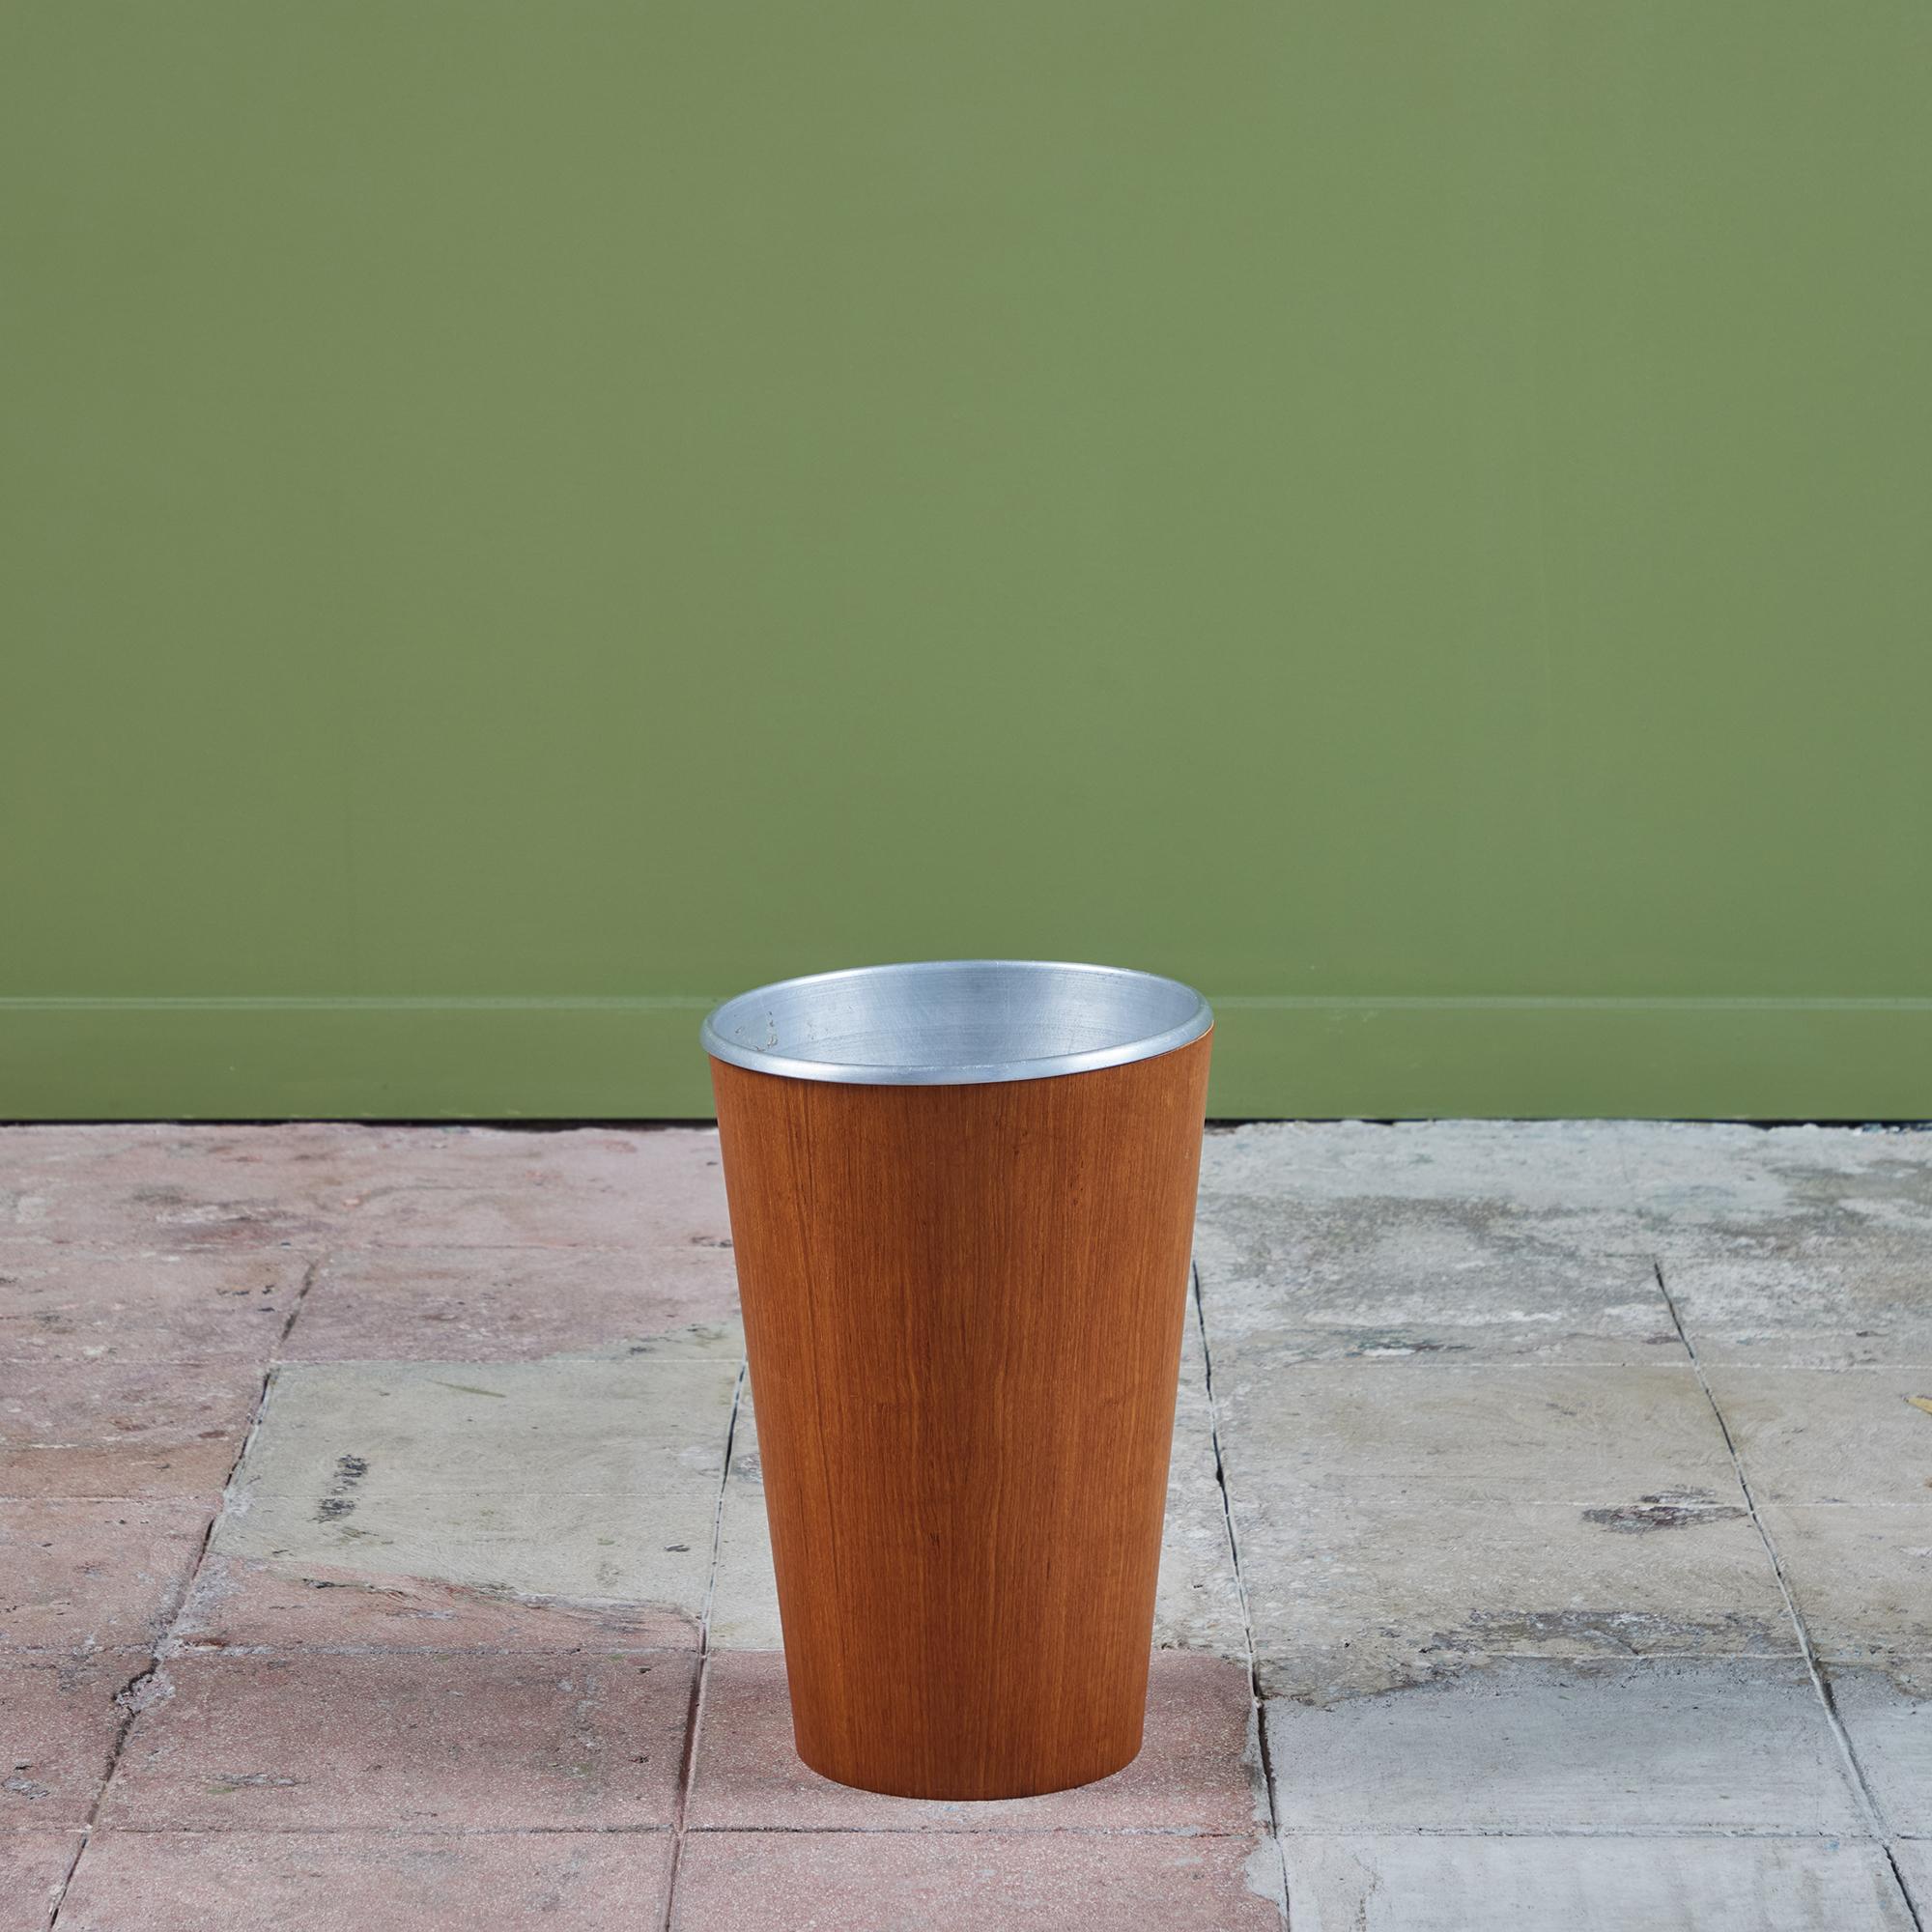 Made in Sweden, this teak wastebasket for Rainbow c.1960s, features a thin circular bent plywood body that tapers towards to the bottom of the bin. The inside of the bin is lined with a removable aluminum insert.

Dimensions
﻿﻿11